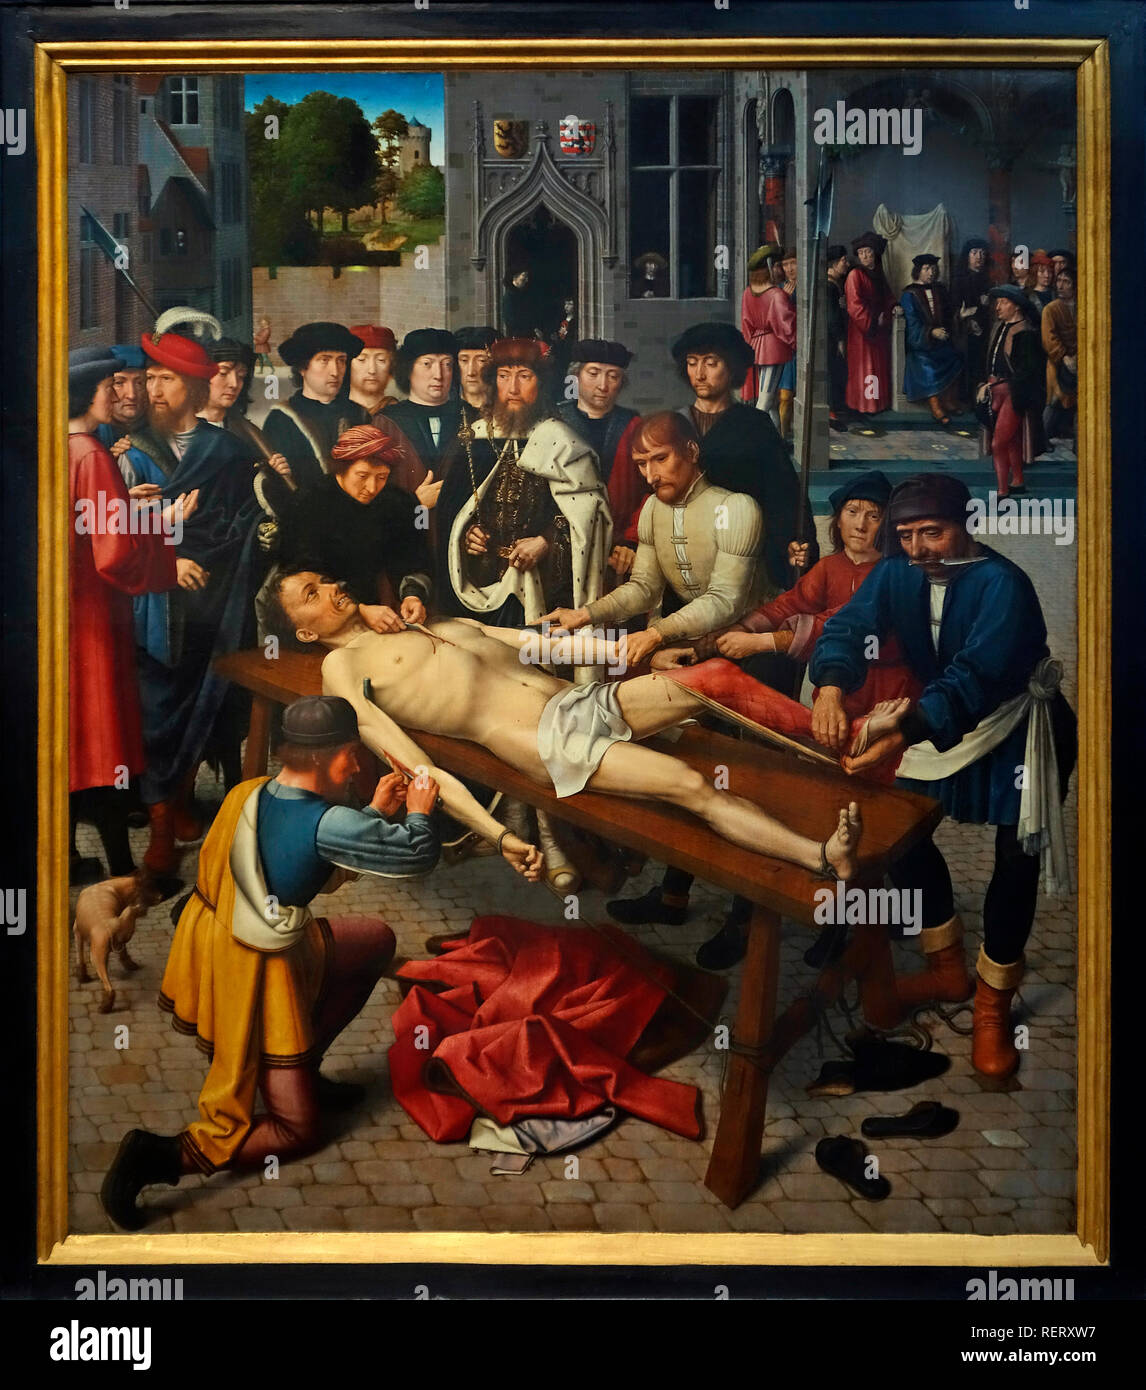 15th century painting The Judgement of Cambyses, part 2 by Gerard David, Early Netherlandish painter in the Groeningemuseum, Bruges, Flanders, Belgium Stock Photo